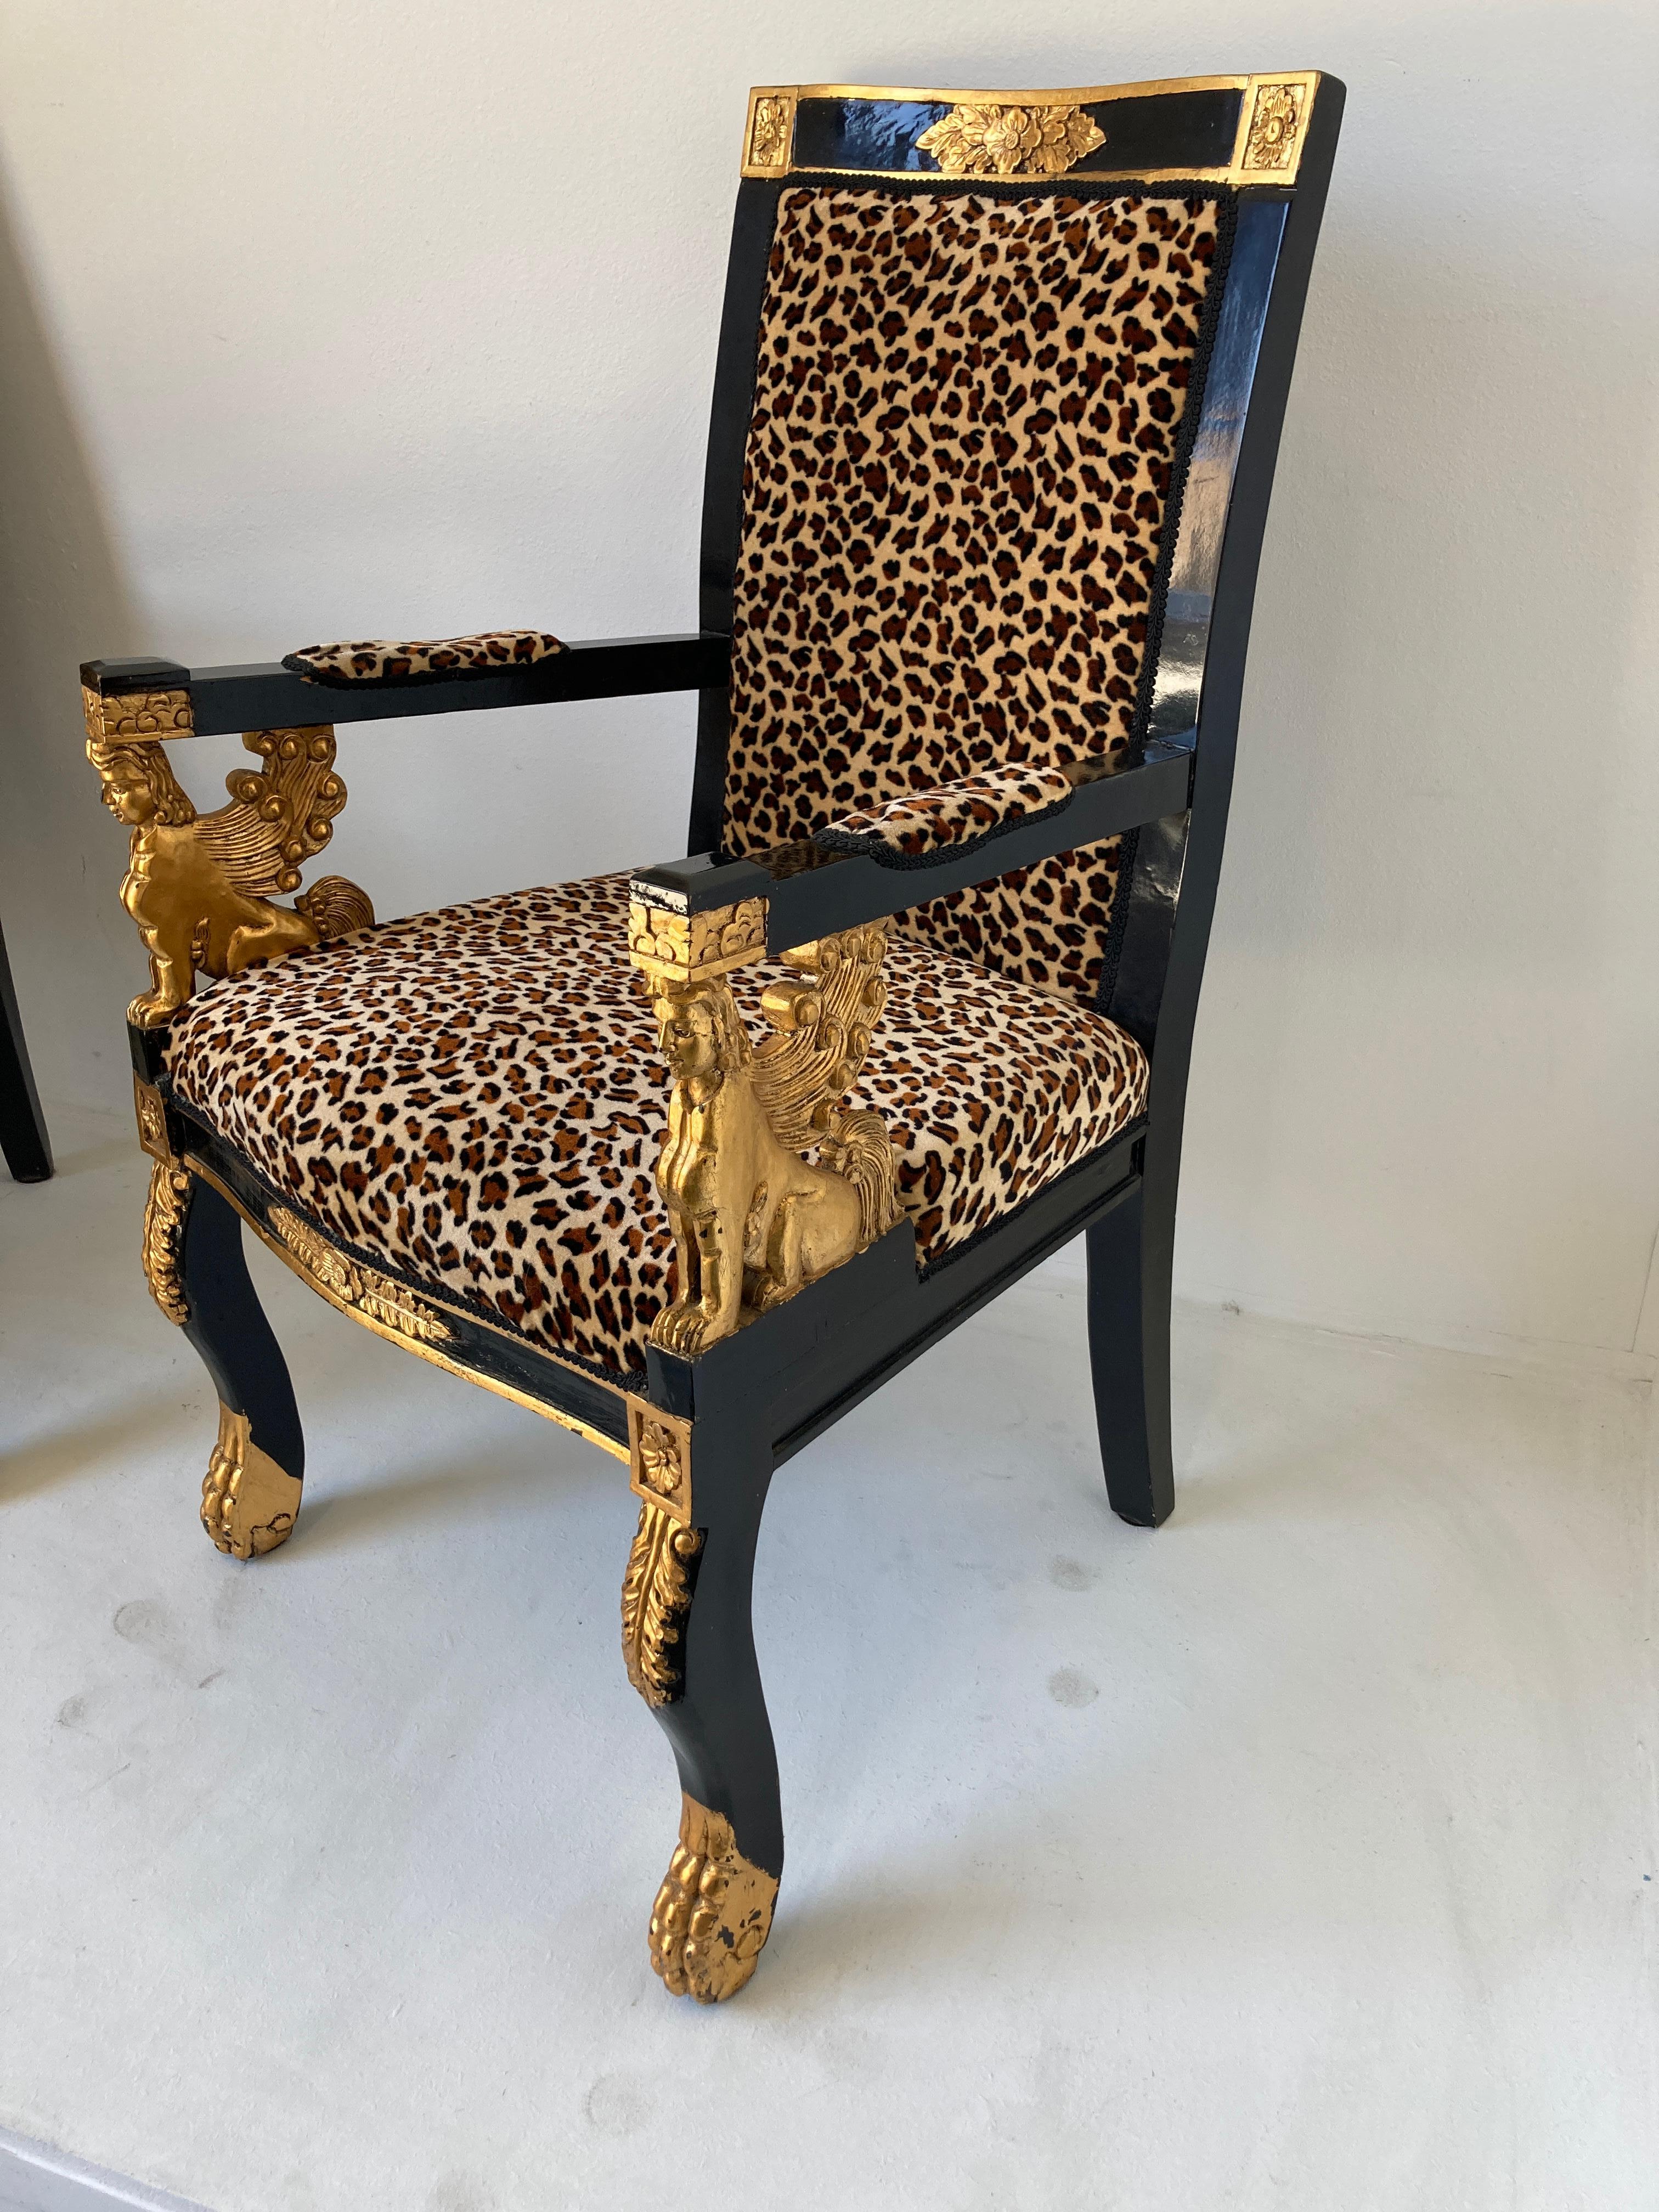 Painted Pair of Vintage Sphinx Egyptian Revival Leopard Print Armchairs